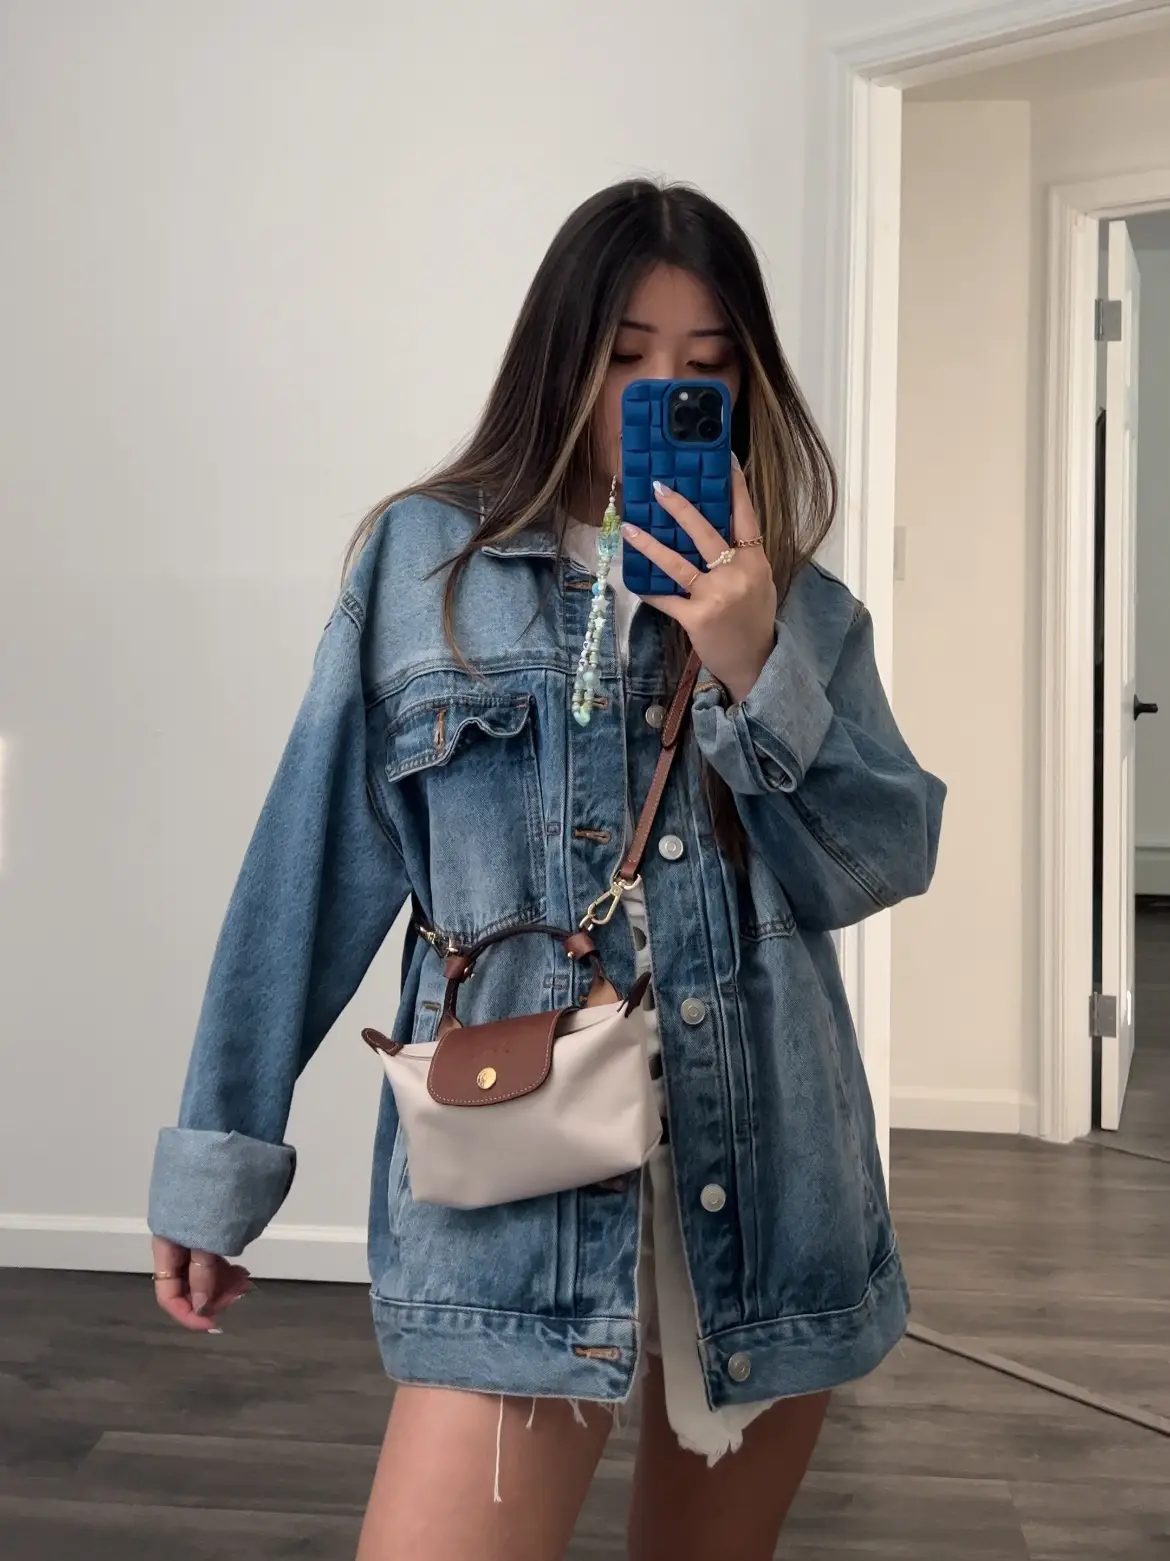 When you DIY the longchamp le pliage to become a crossbody it